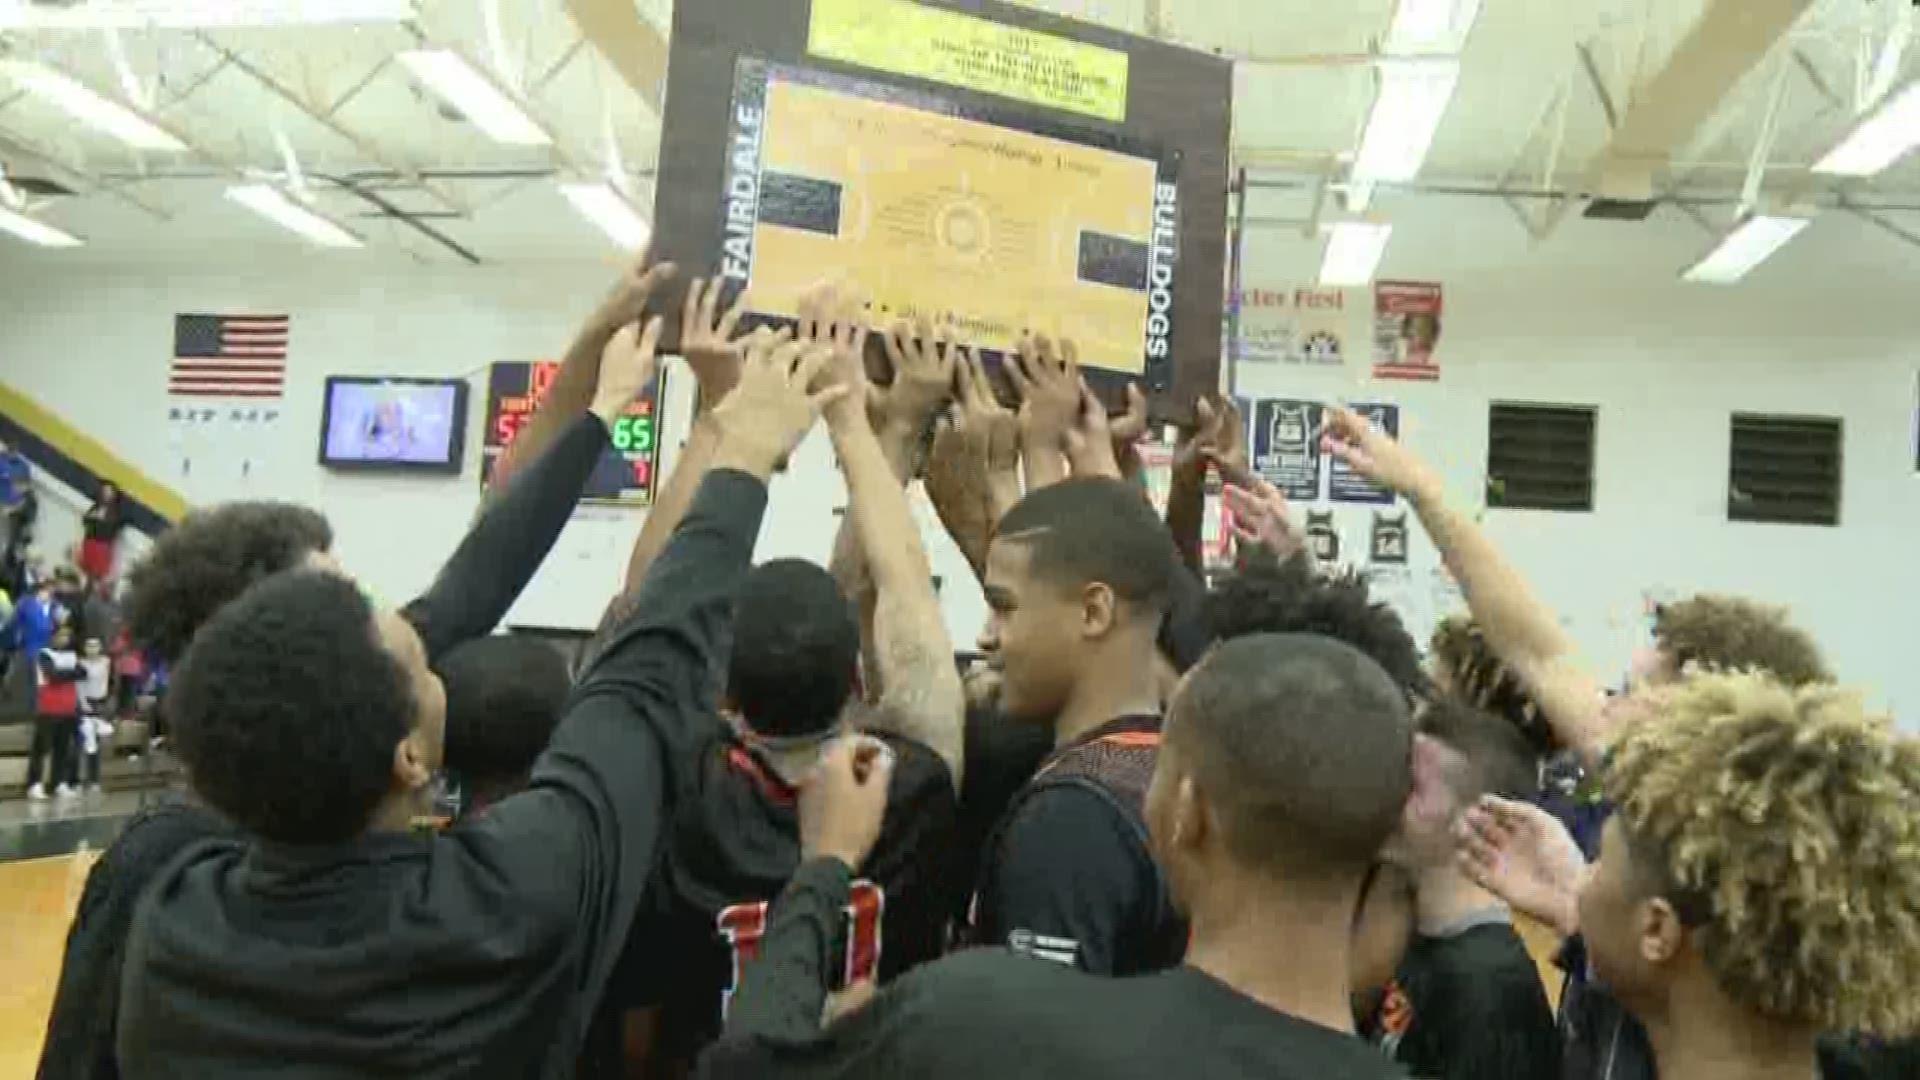 Fern Creek hangs on to win 65-57. The program's first ever King of the Bluegrass title led by Anthony Wales' 26 points.